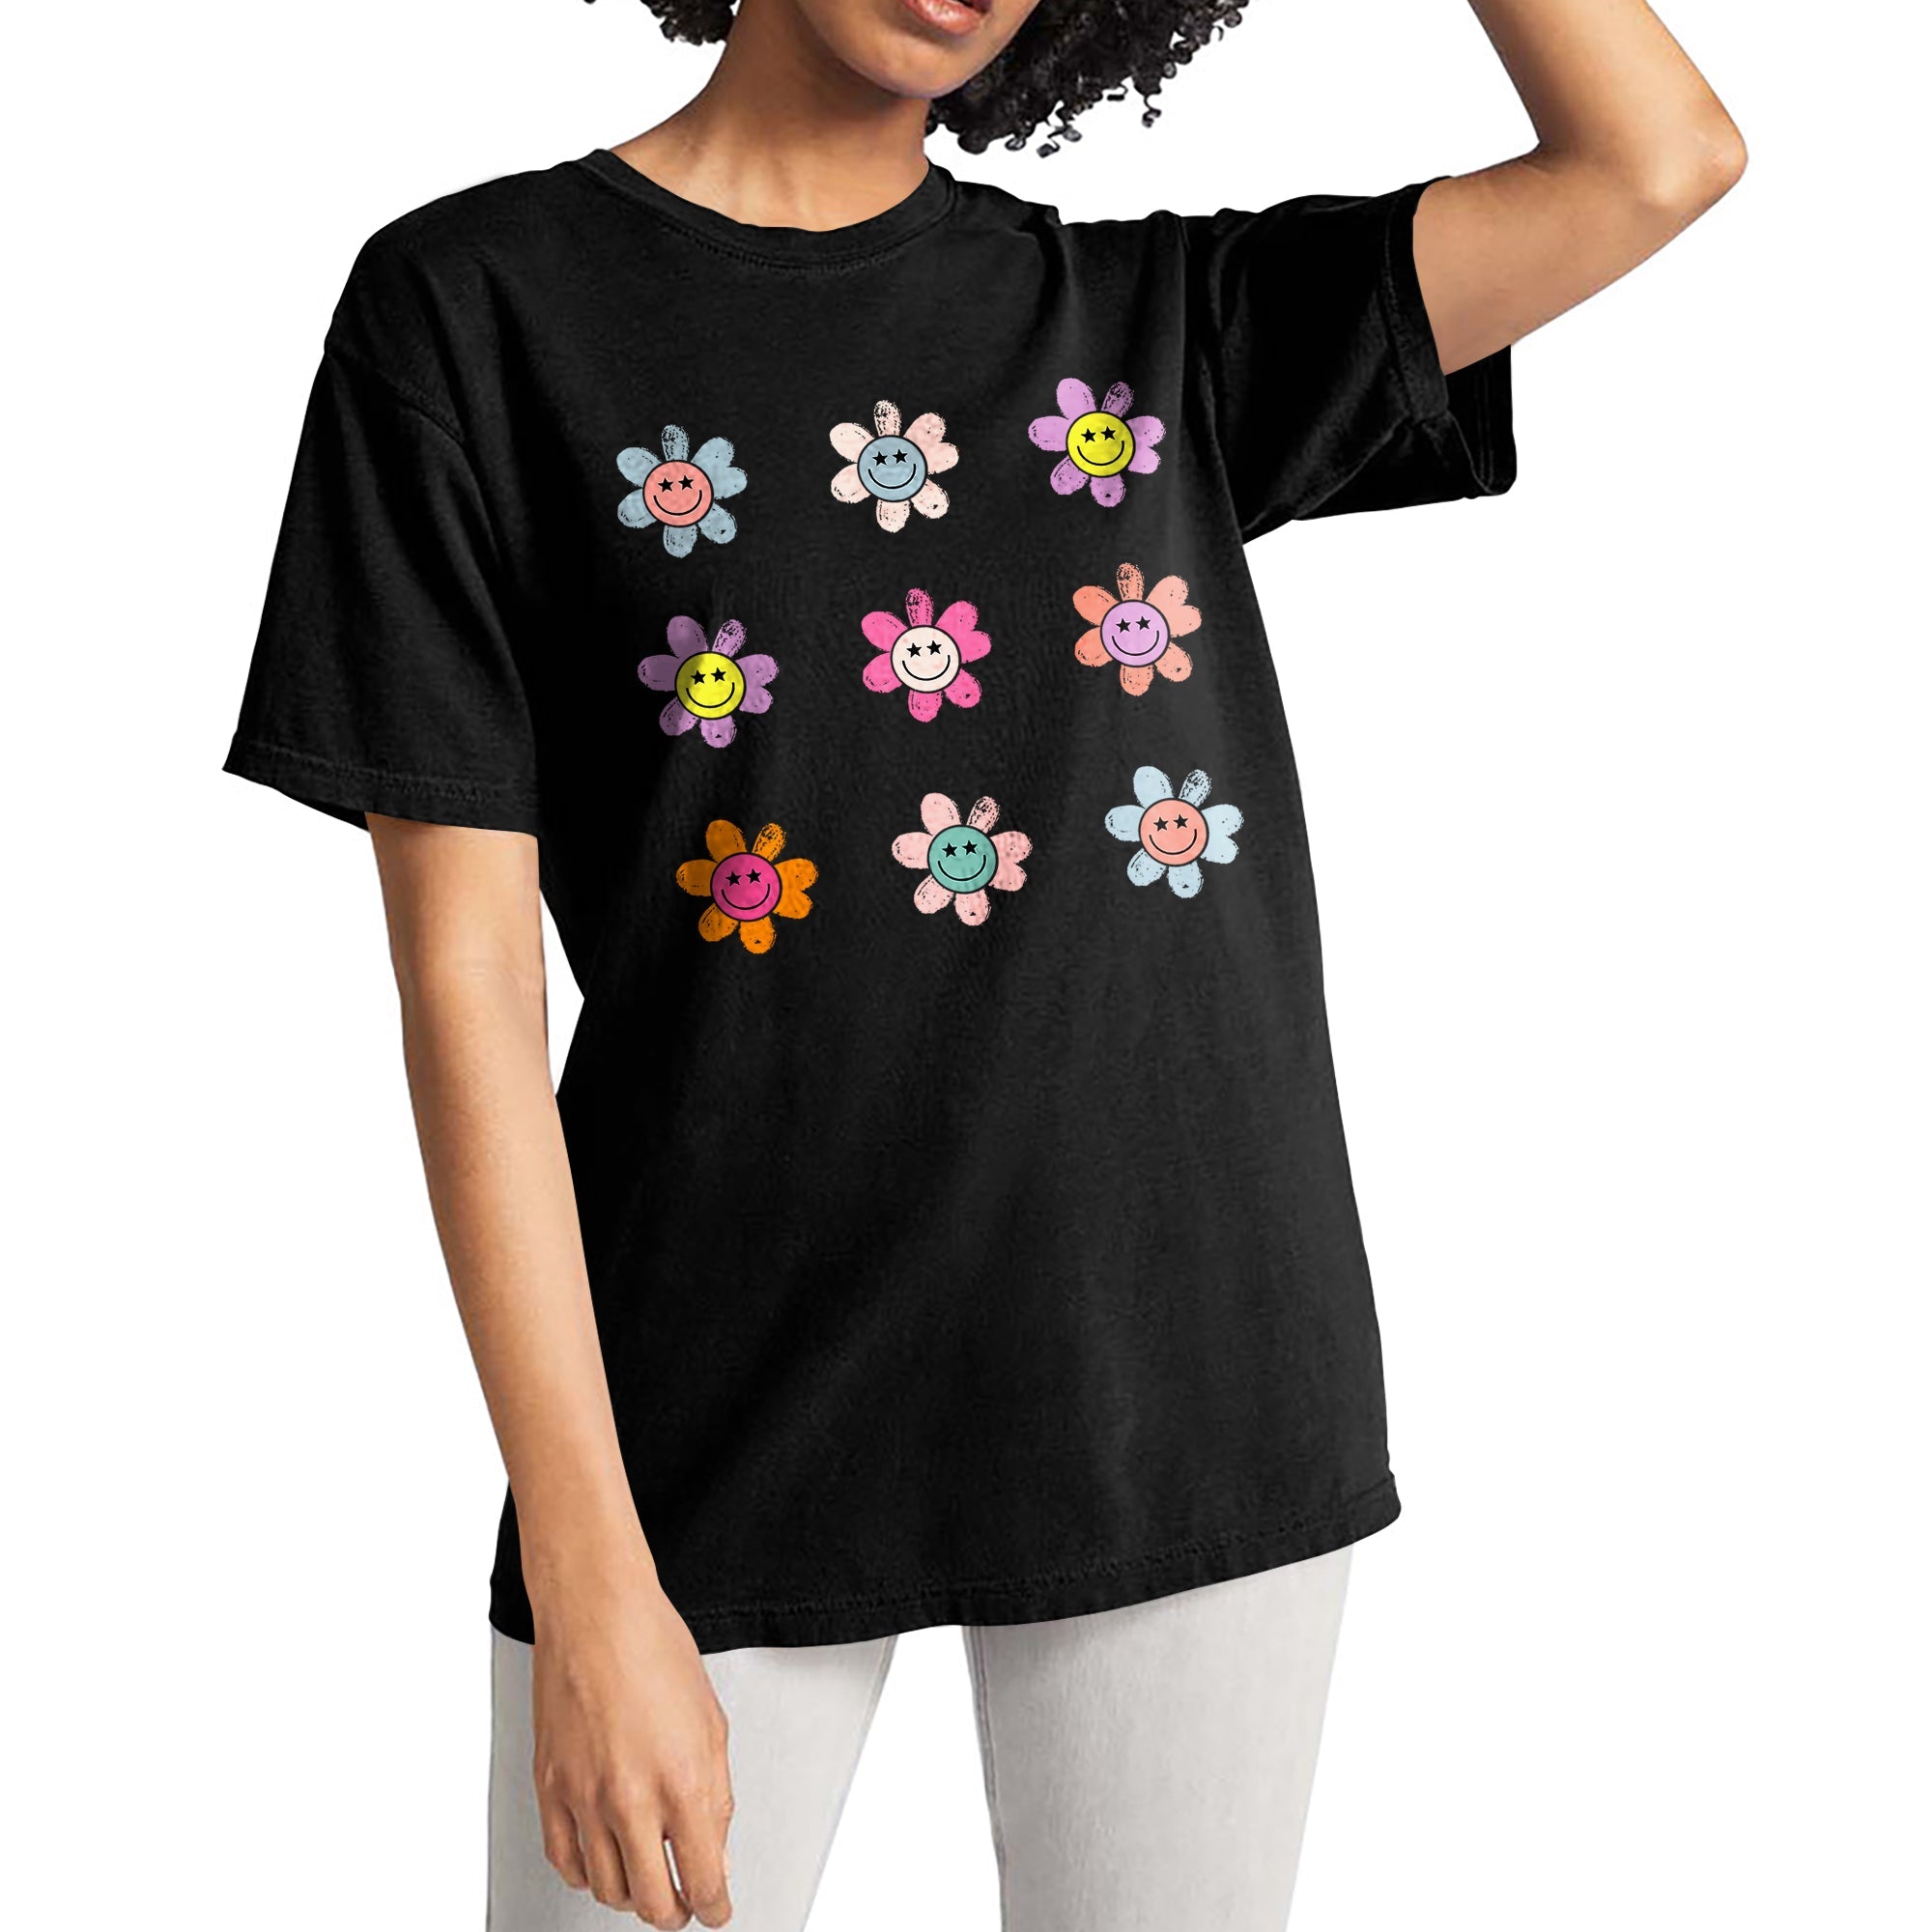 Smiley Daisy Garden Garment-Dyed Tee - Stories You Can Wear